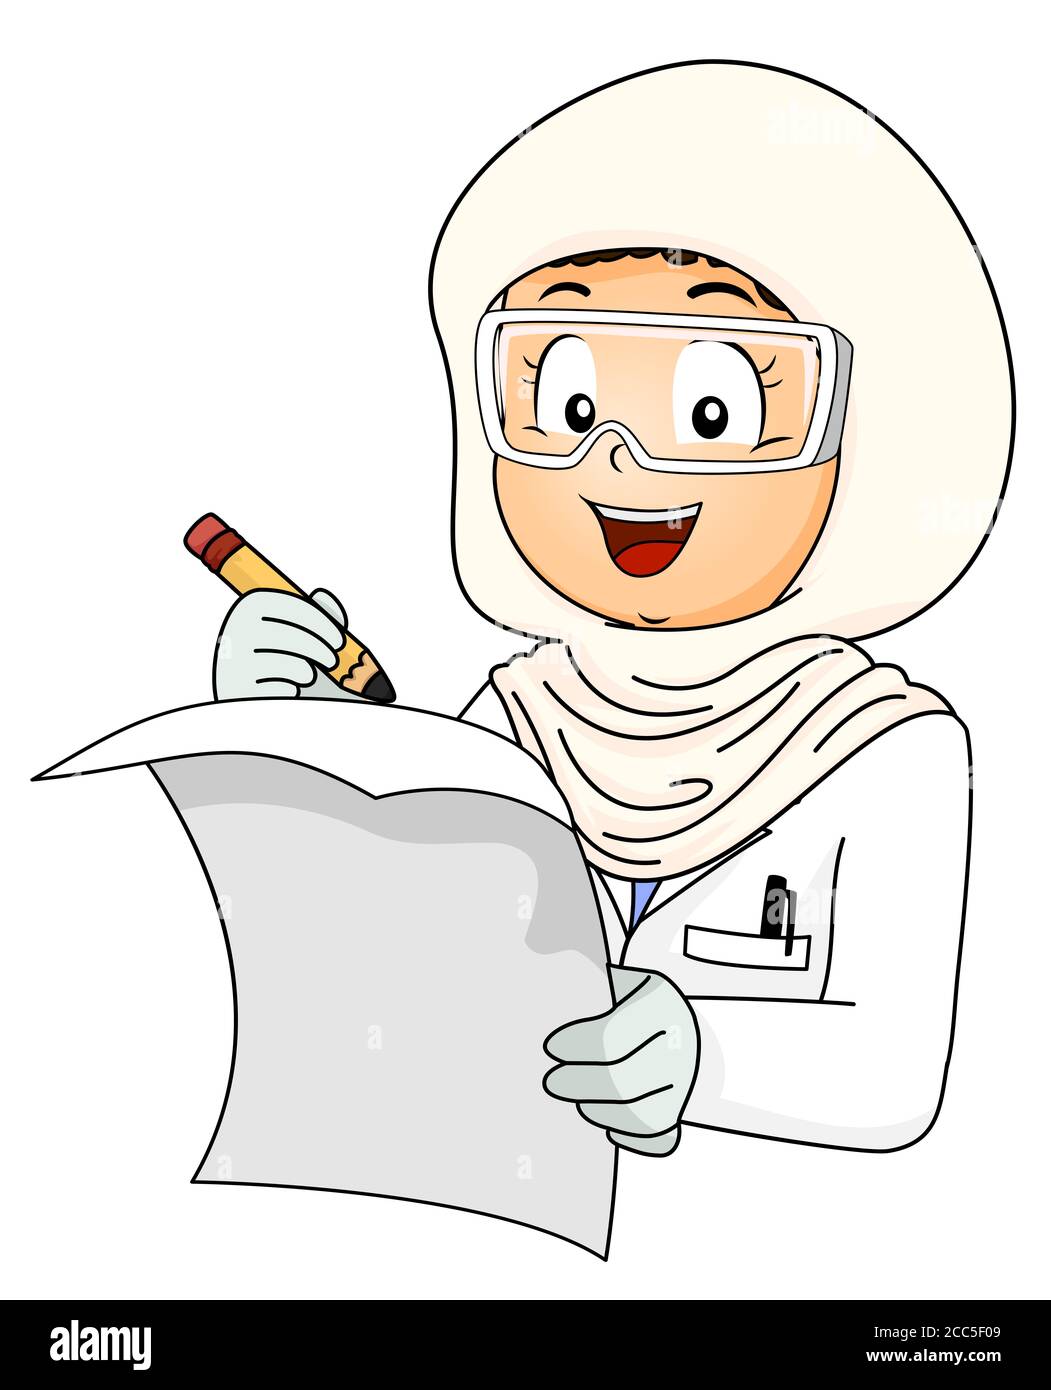 Illustration of a Kid Girl Wearing Hijab and Laboratory Gown, Goggles and Gloves, Writing Results on Paper Stock Photo